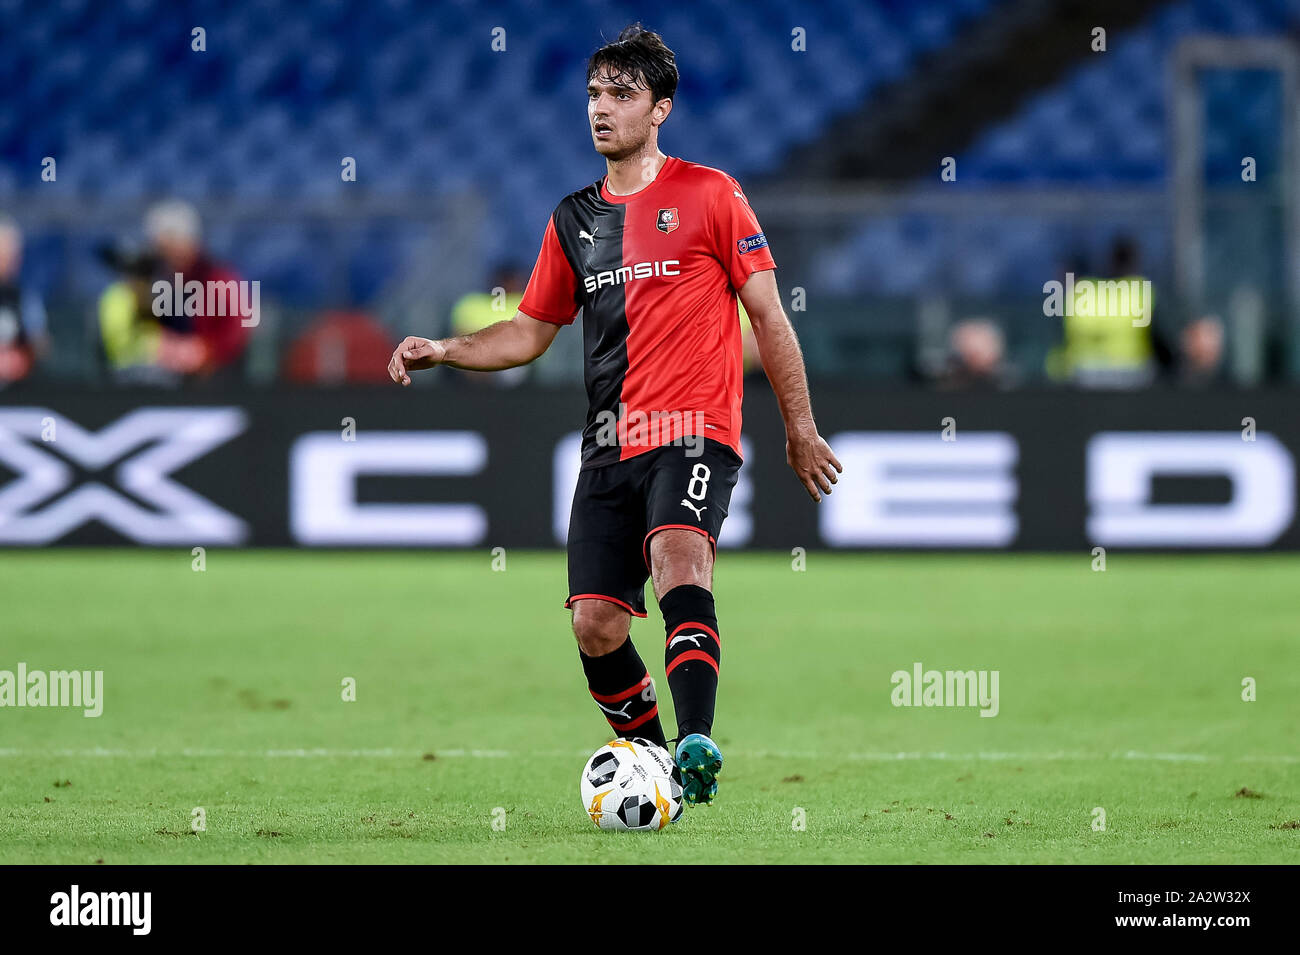 Rome, Italy. 03rd Oct, 2019. Clement Grenier of Rennes during the UEFA Europa League match between Lazio and Rennes at Stadio Olimpico, Rome, Italy on 3 October 2019. Credit: Giuseppe Maffia/Alamy Live News Stock Photo